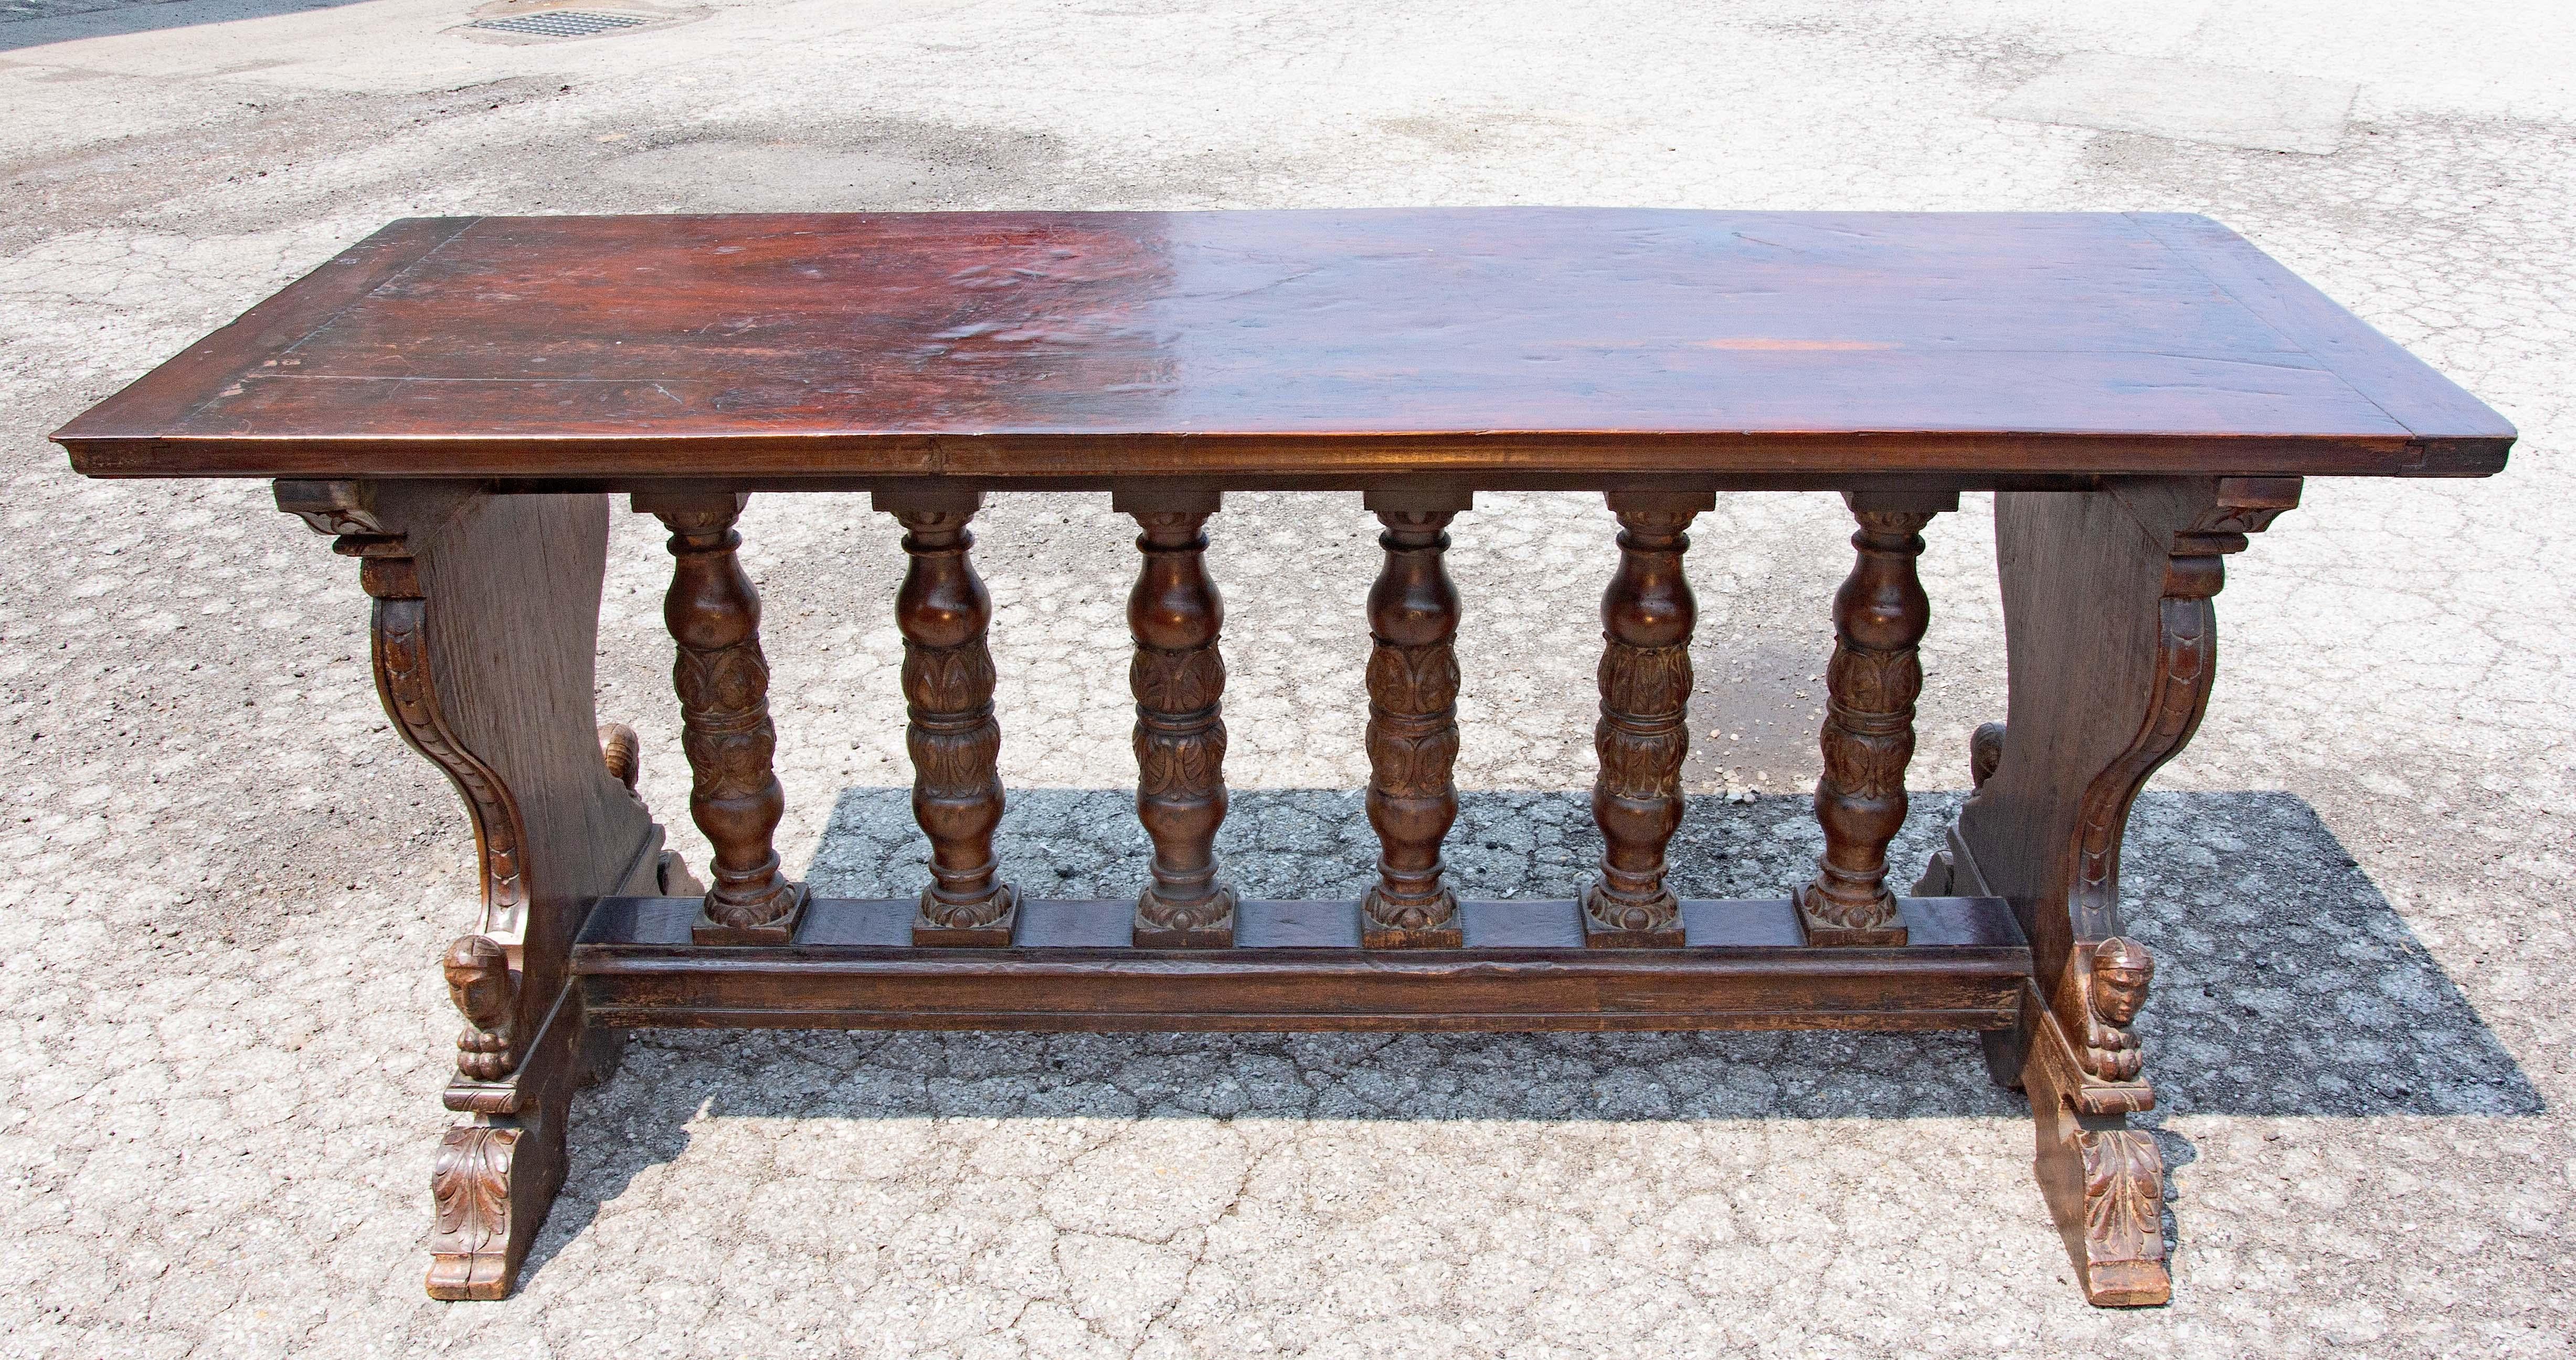 Italian 19th century renaissance style refractory or library table. Solid walnut. Well carved. Top has rich color. Please, contact us for shipping options. 